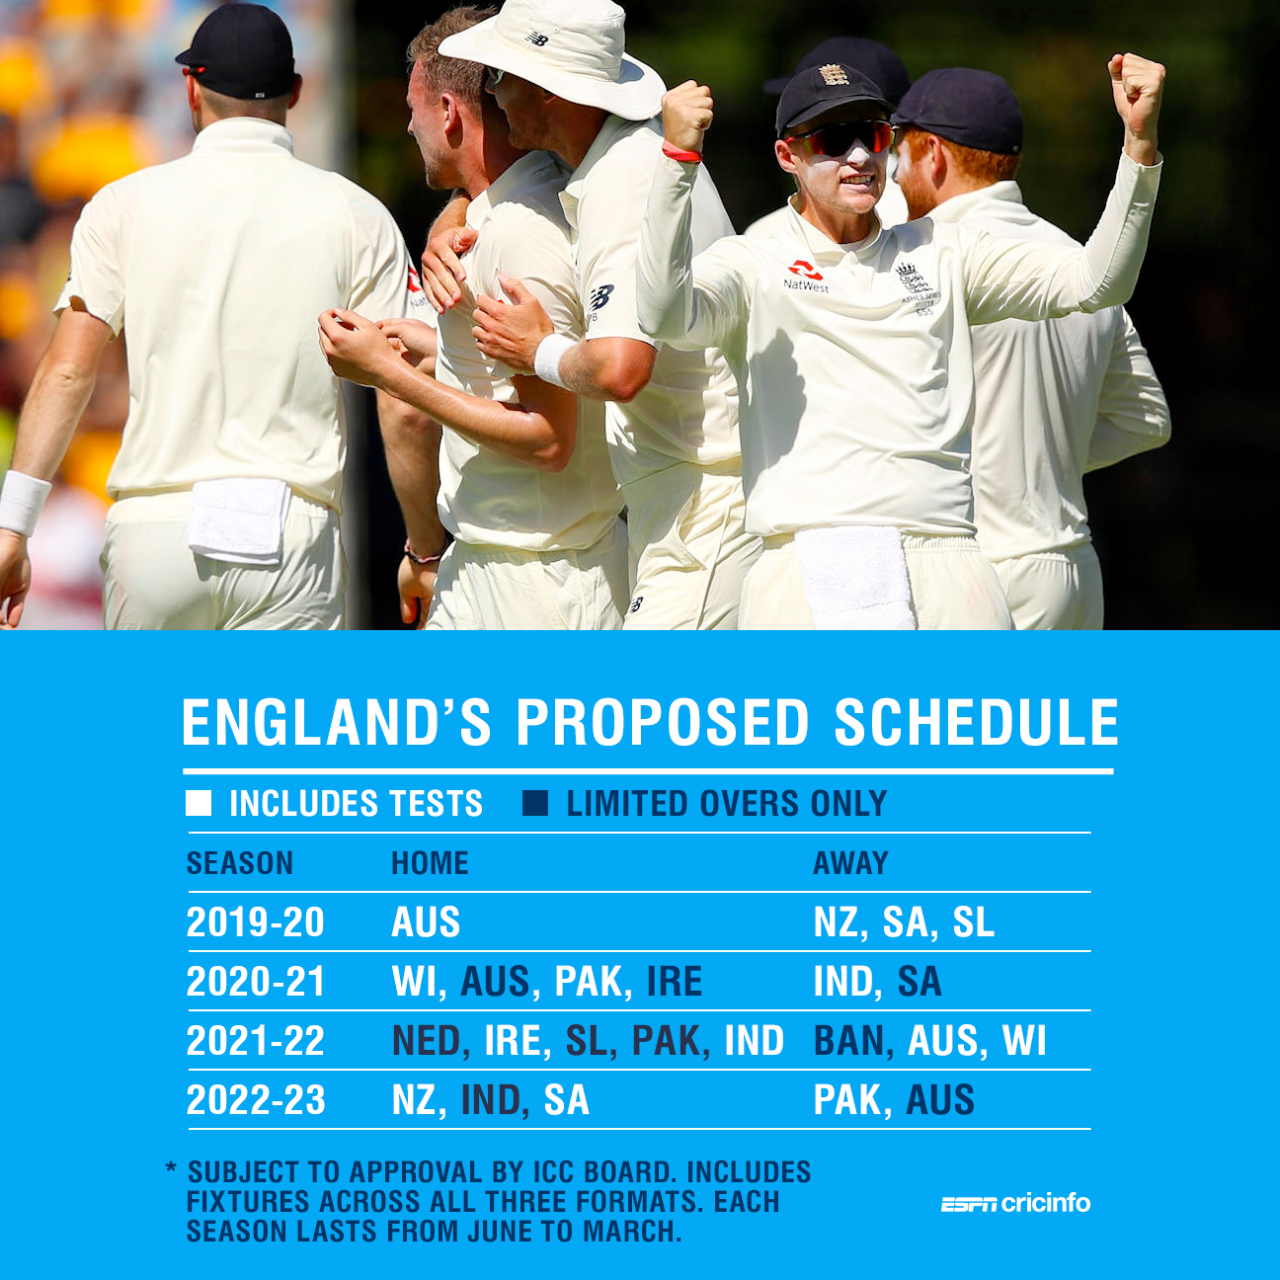 England will play the most Tests among all teams: 46 of them between 2019 and 2023